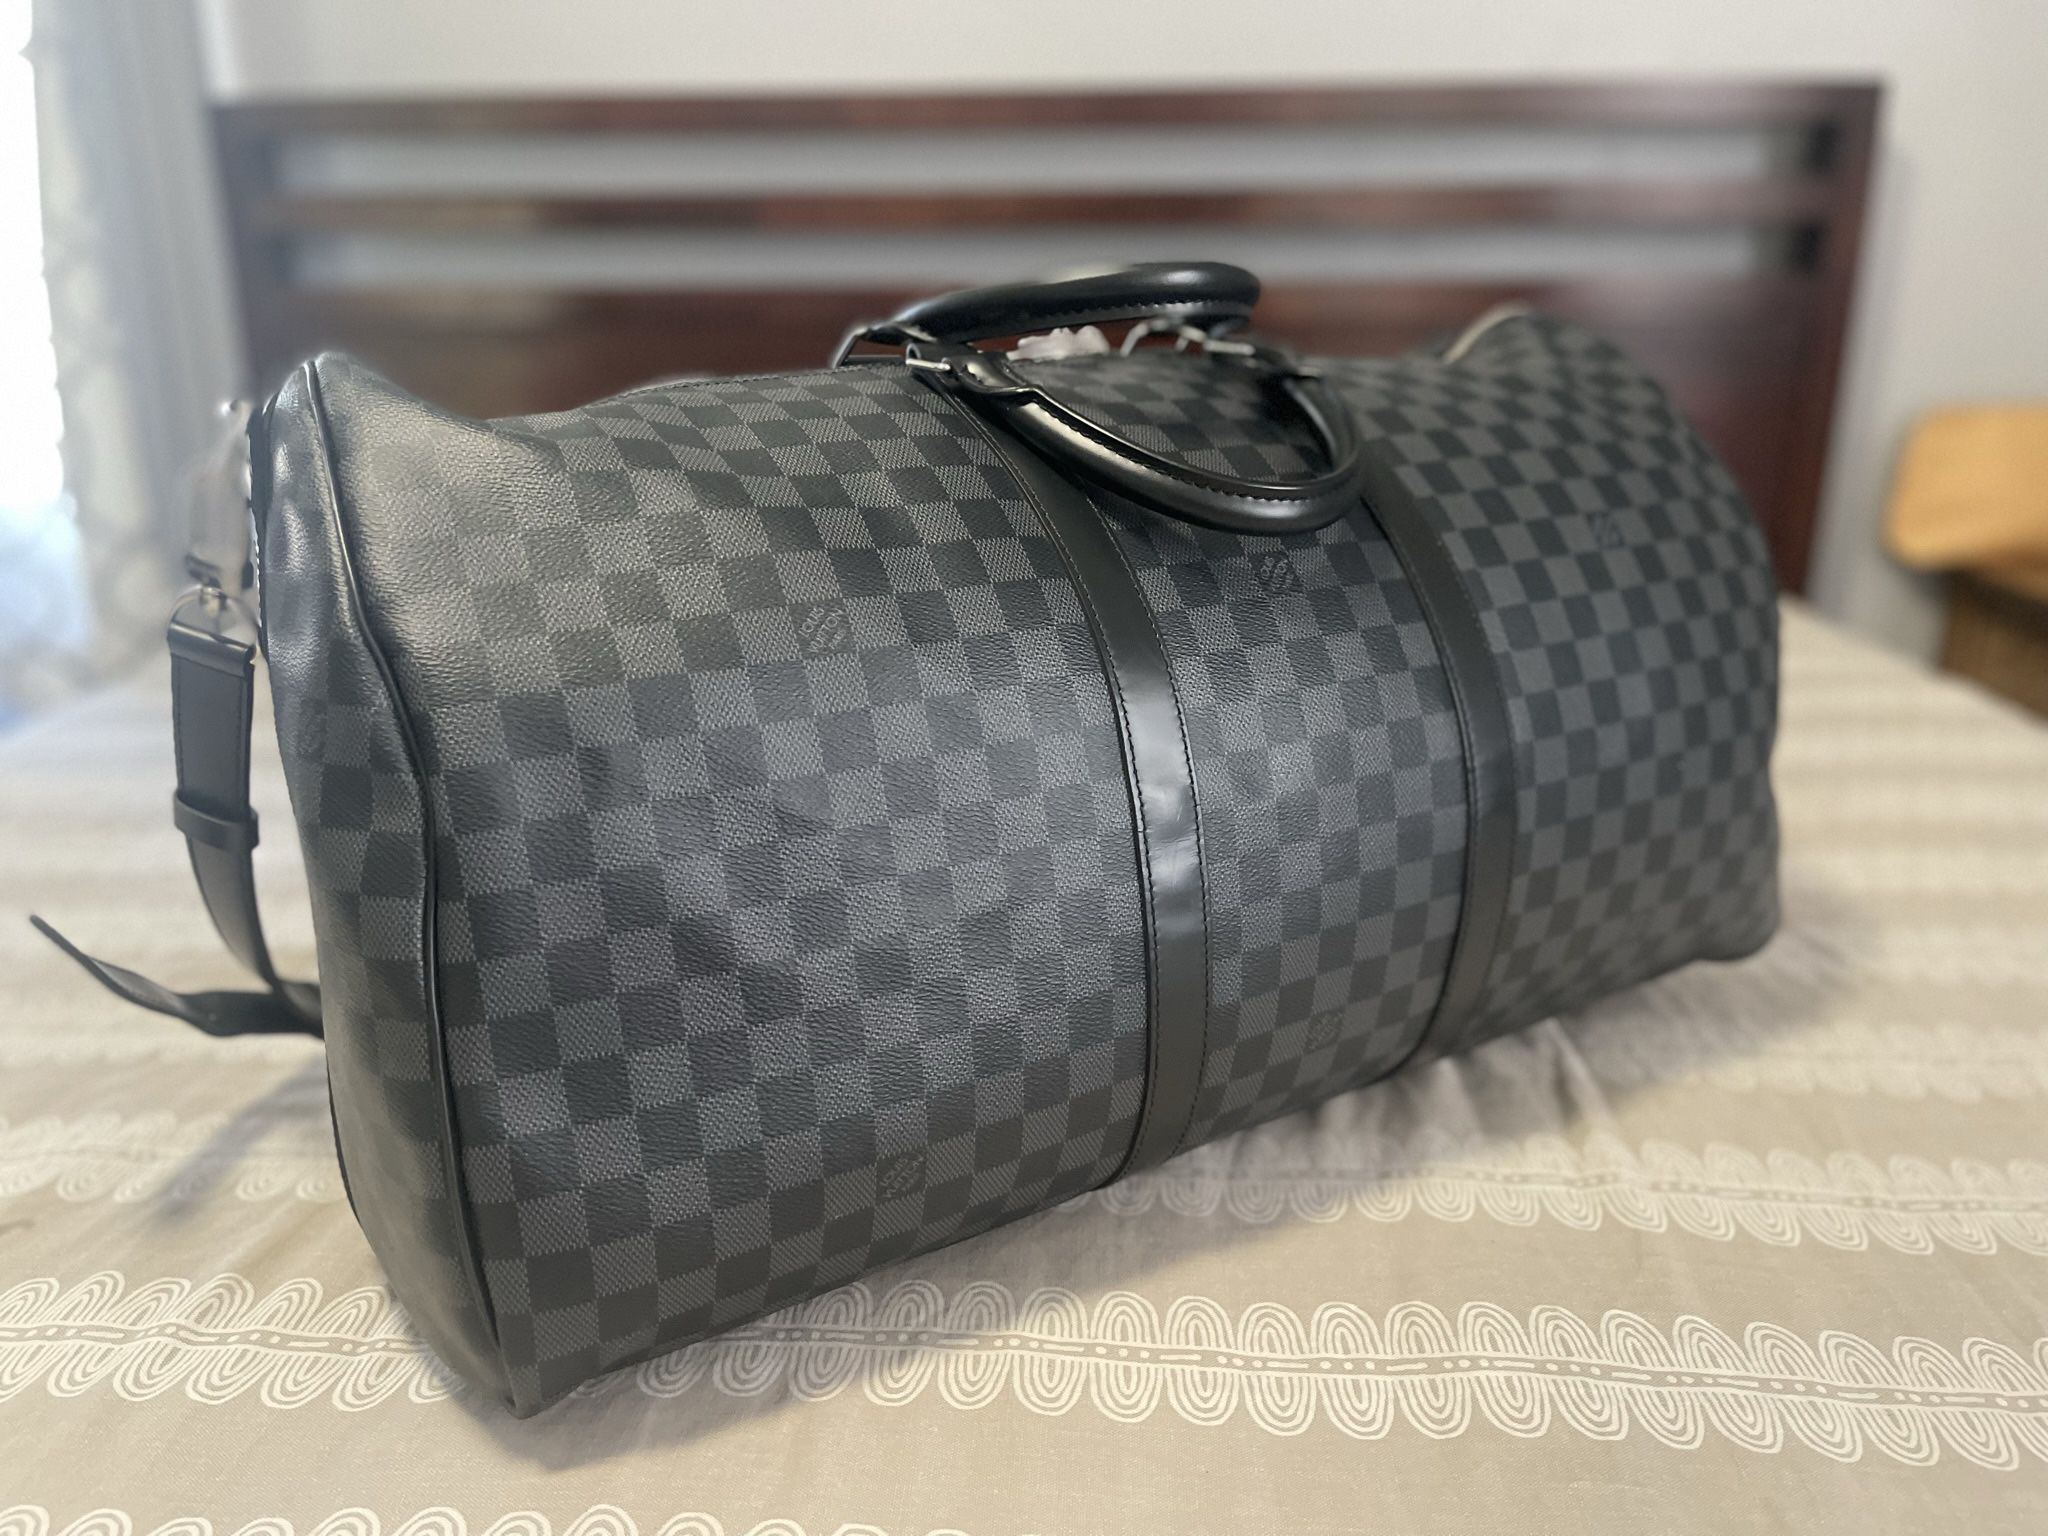 55 Louis Vuitton Duffle Bag for Sale in Greer, SC - OfferUp